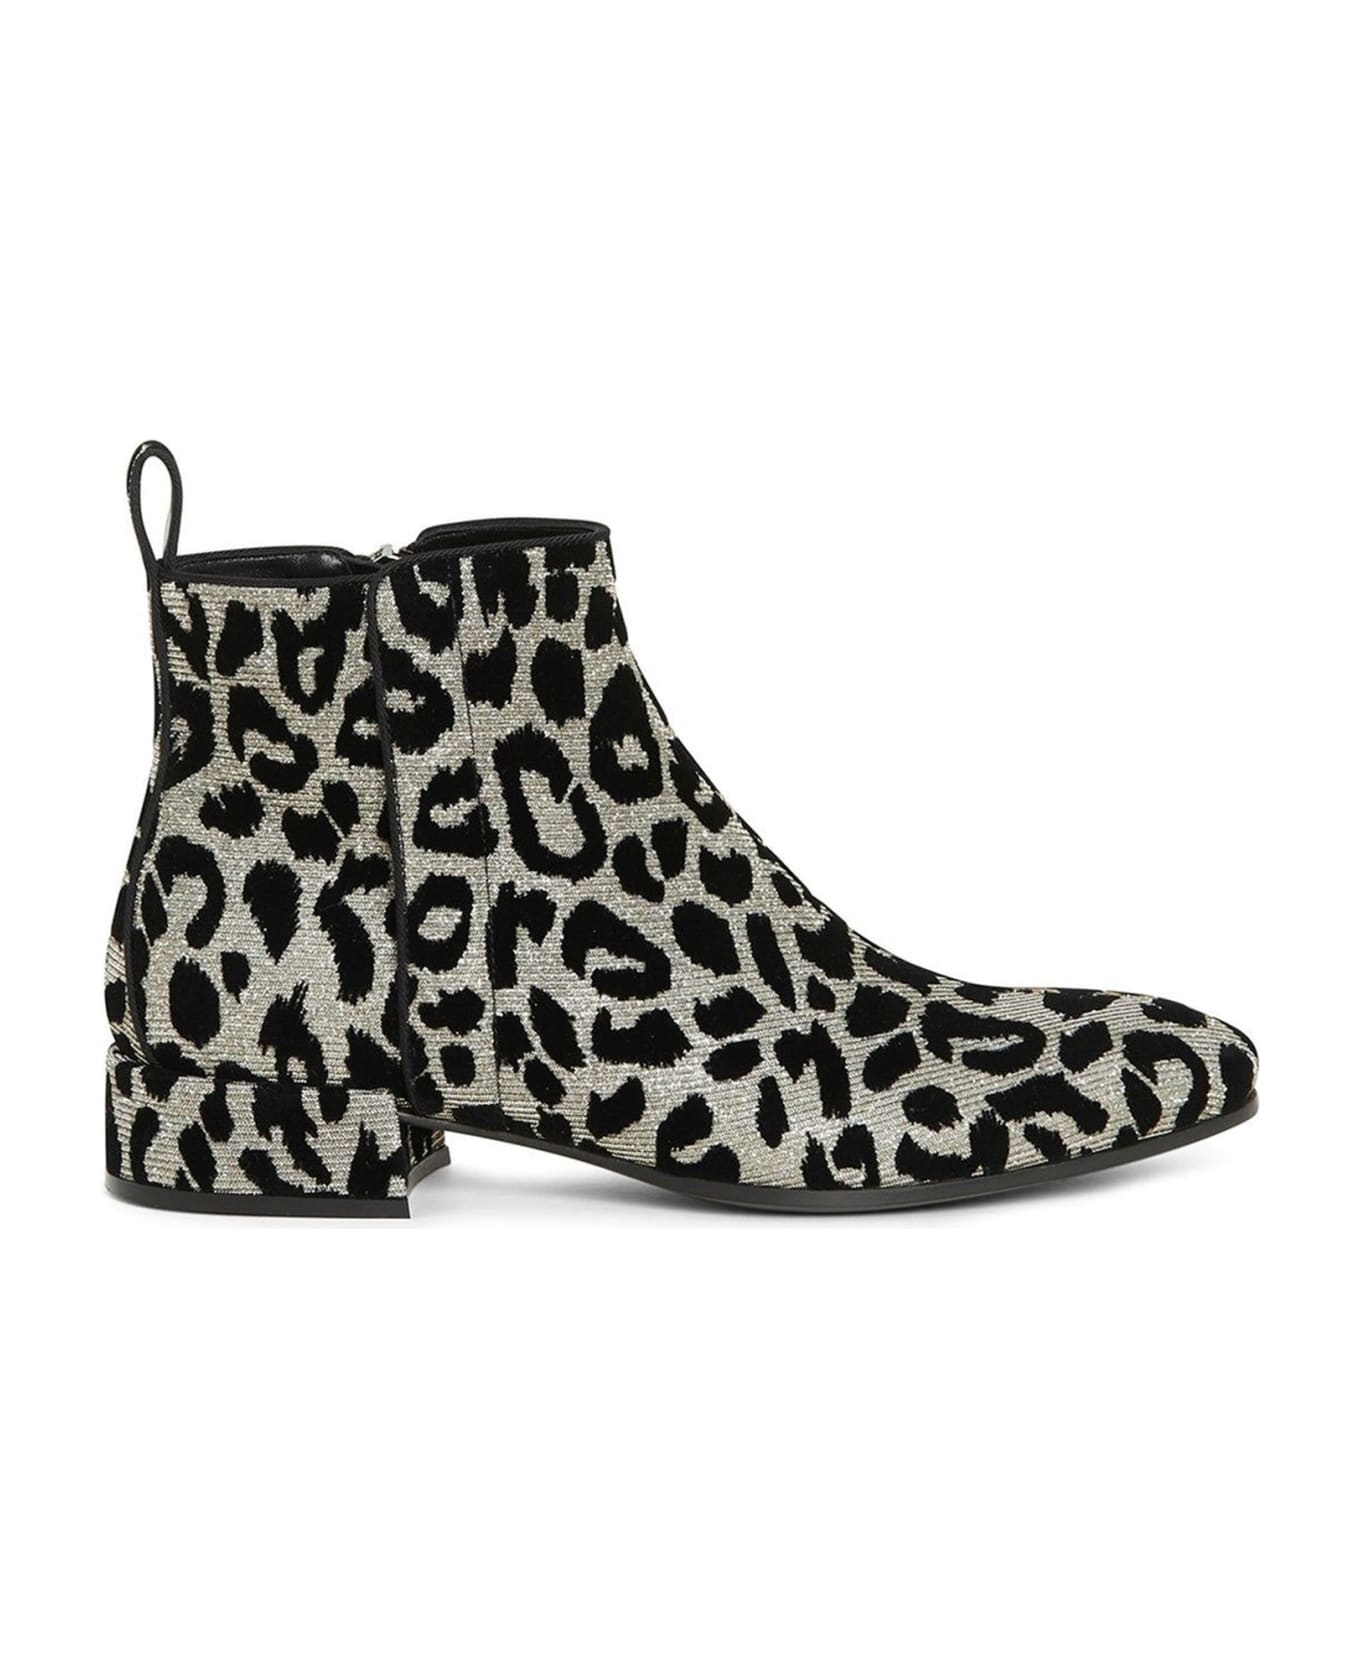 Dolce & Gabbana Leopard Ankle Boots - Silver ブーツ